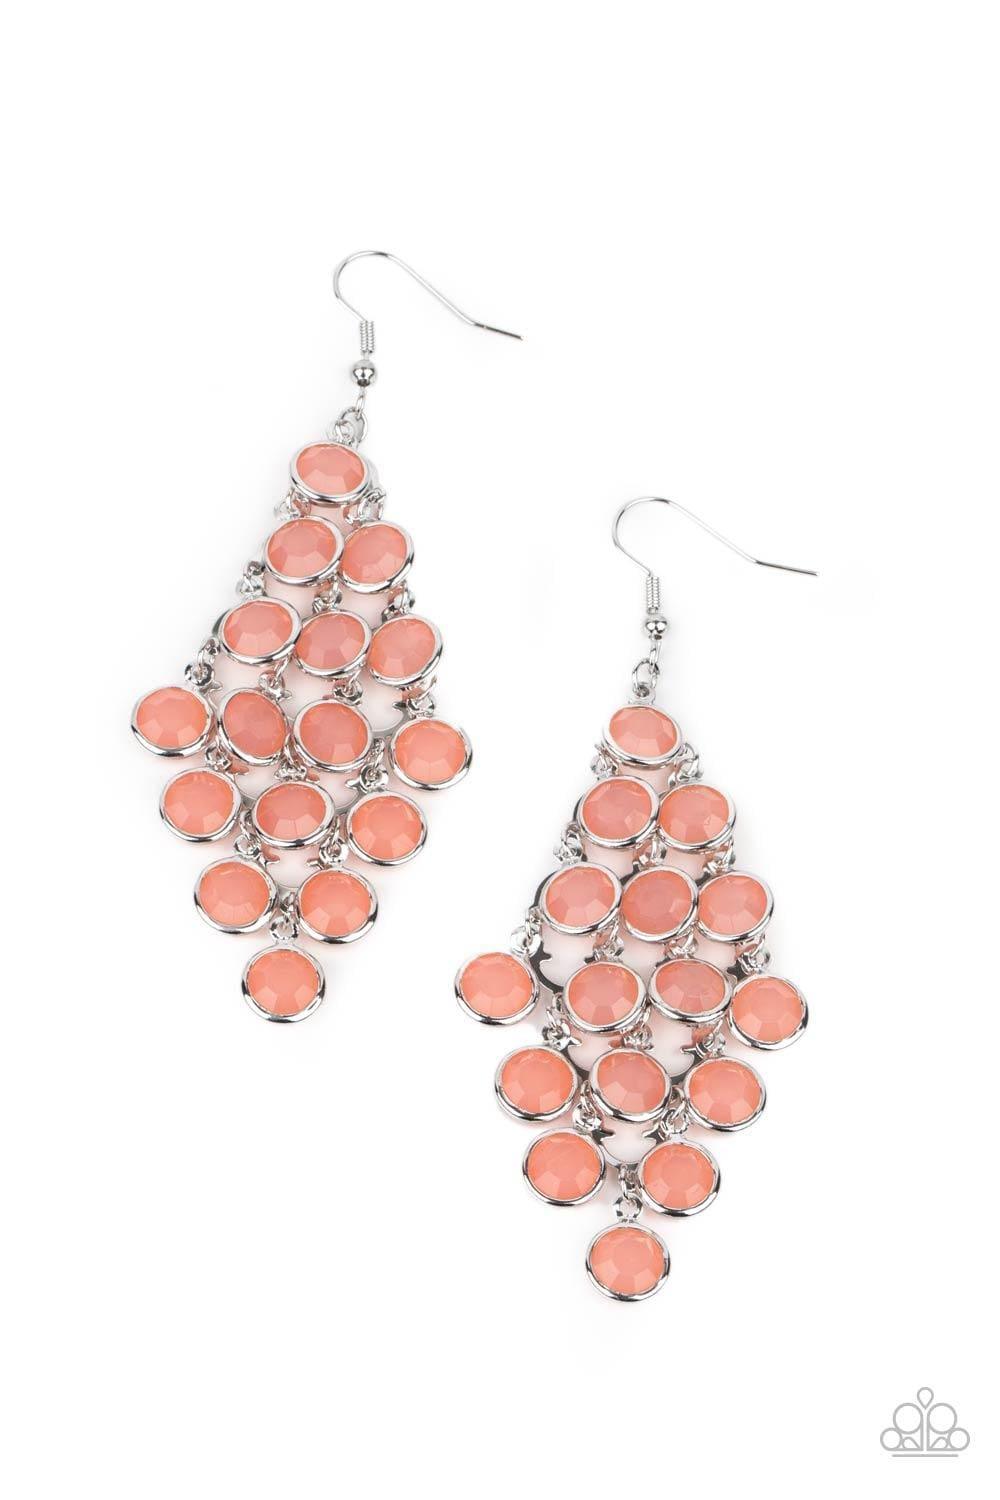 Paparazzi Accessories - With All Dew Respect - Orange Earrings - Bling by JessieK